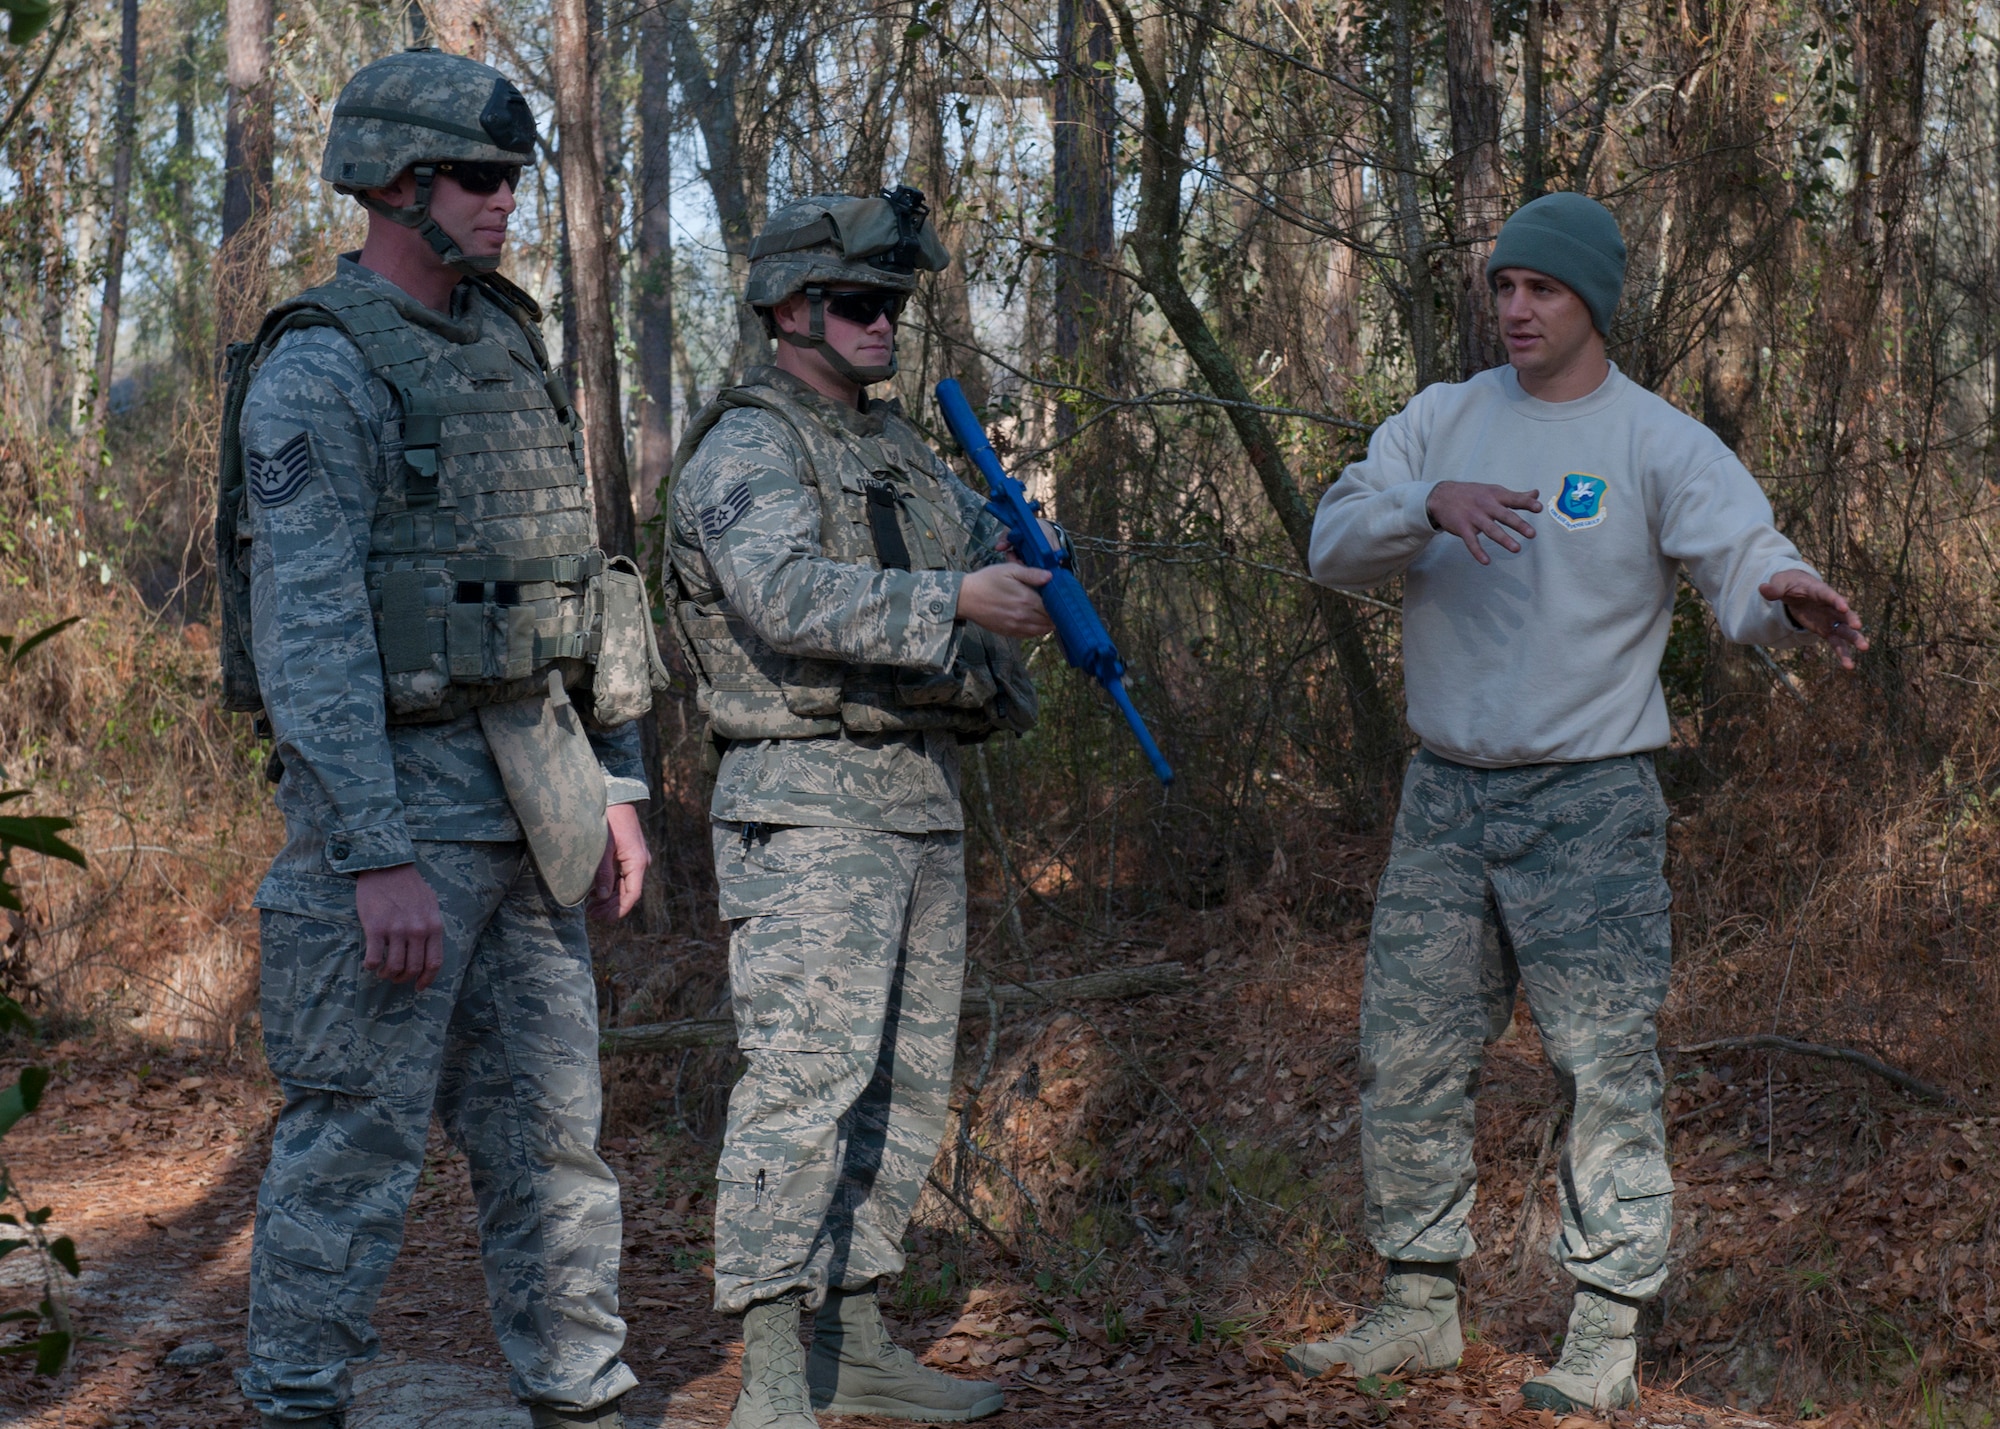 U.S. Air Force Tech. Sgt. Dallas Bozeman, 820th Combat Operations Squadron explosive ordnance disposal technician, instructs other members of his squadron on how to tactically maneuver through the woods to locate improvised explosive devices at the military operations in urban terrain village Feb. 8, 2012 at Moody Air Force Base, Ga. Bozeman was recently awarded the Maj. Gen. Eugene A. Lupia non-commissioned officer category award for his successful performances down range. Along with his deployment, Bozeman was acknowledged for the humanitarian work he did in Tuscaloosa, Ala., aiding the citizens of the town who had been devastated from a violent tornado. (U.S. Air Force photo by Senior Airman Eileen Meier/Released)